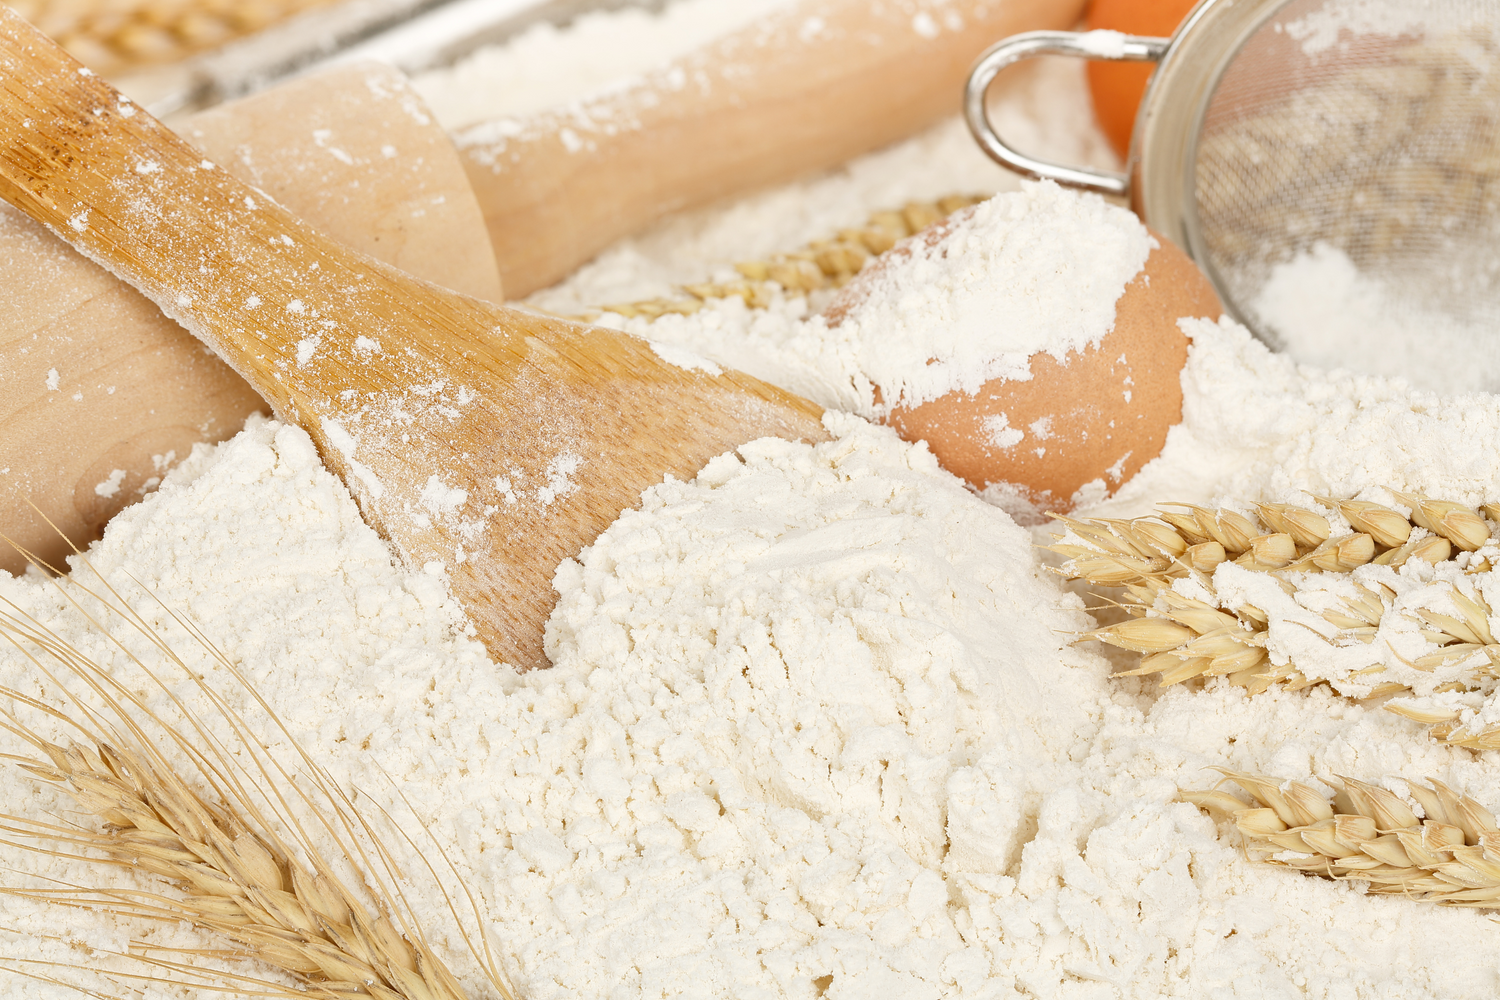 How to Mill Your Own Flour at Home